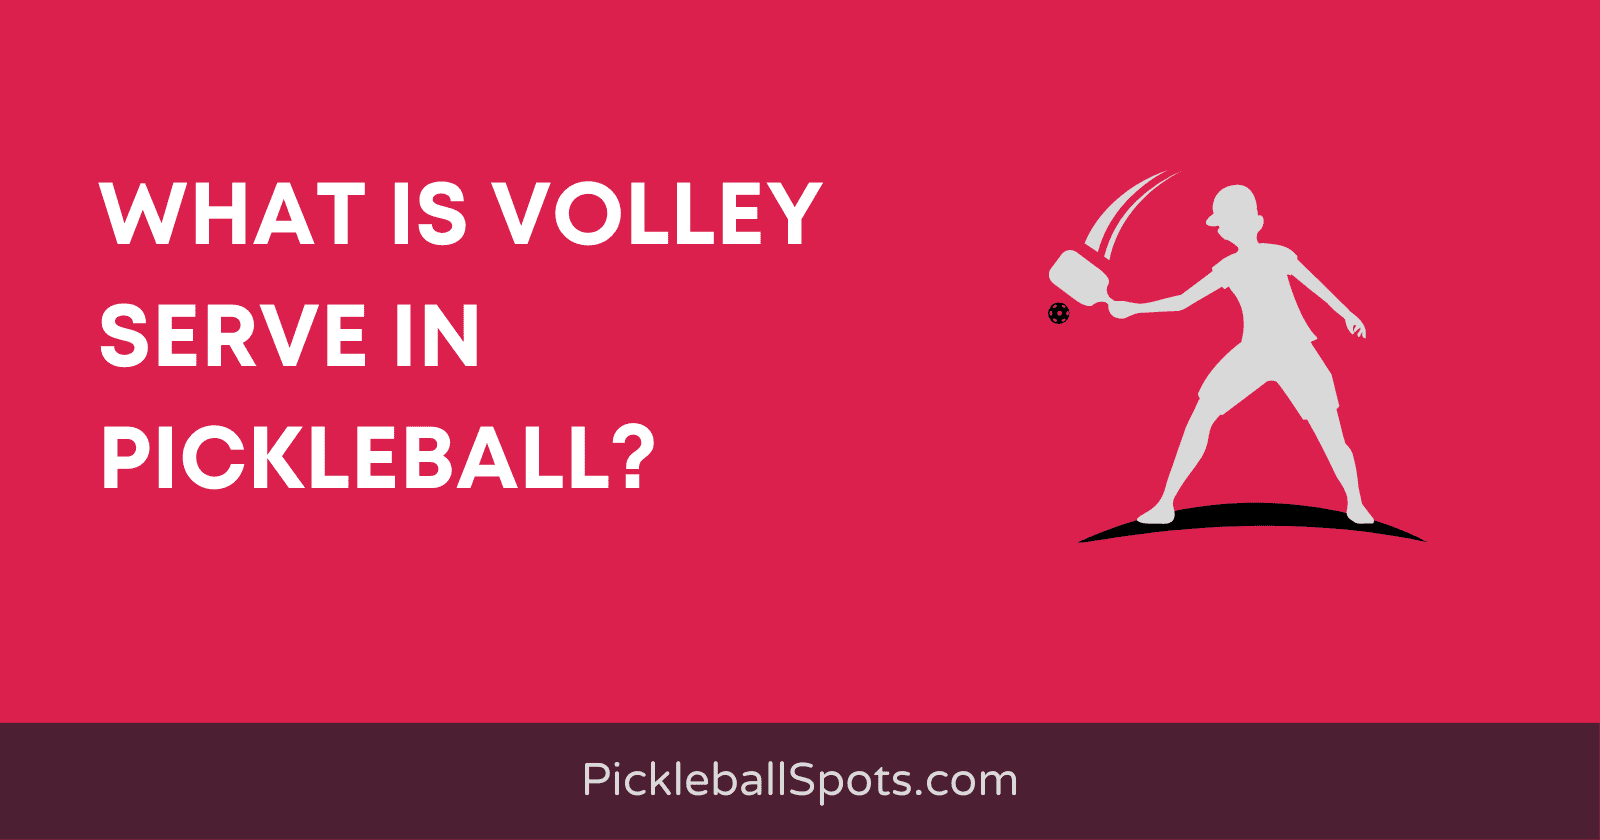 What Is Volley Serve In Pickleball